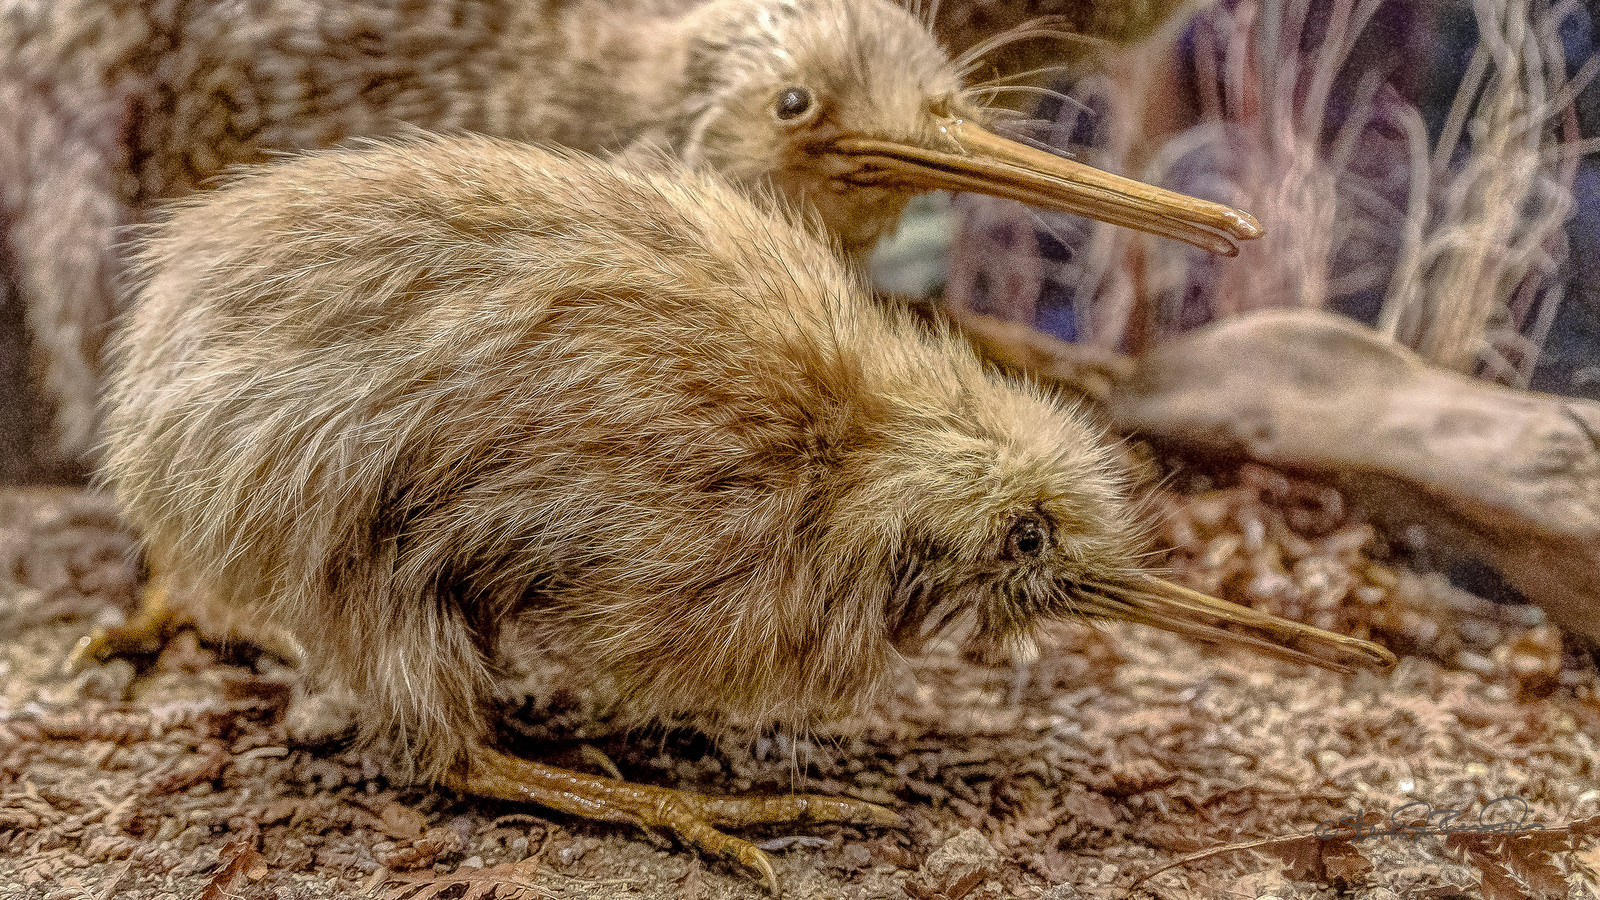 You’d have to give birth to a 30-pound baby to truly know how a kiwi bird feels